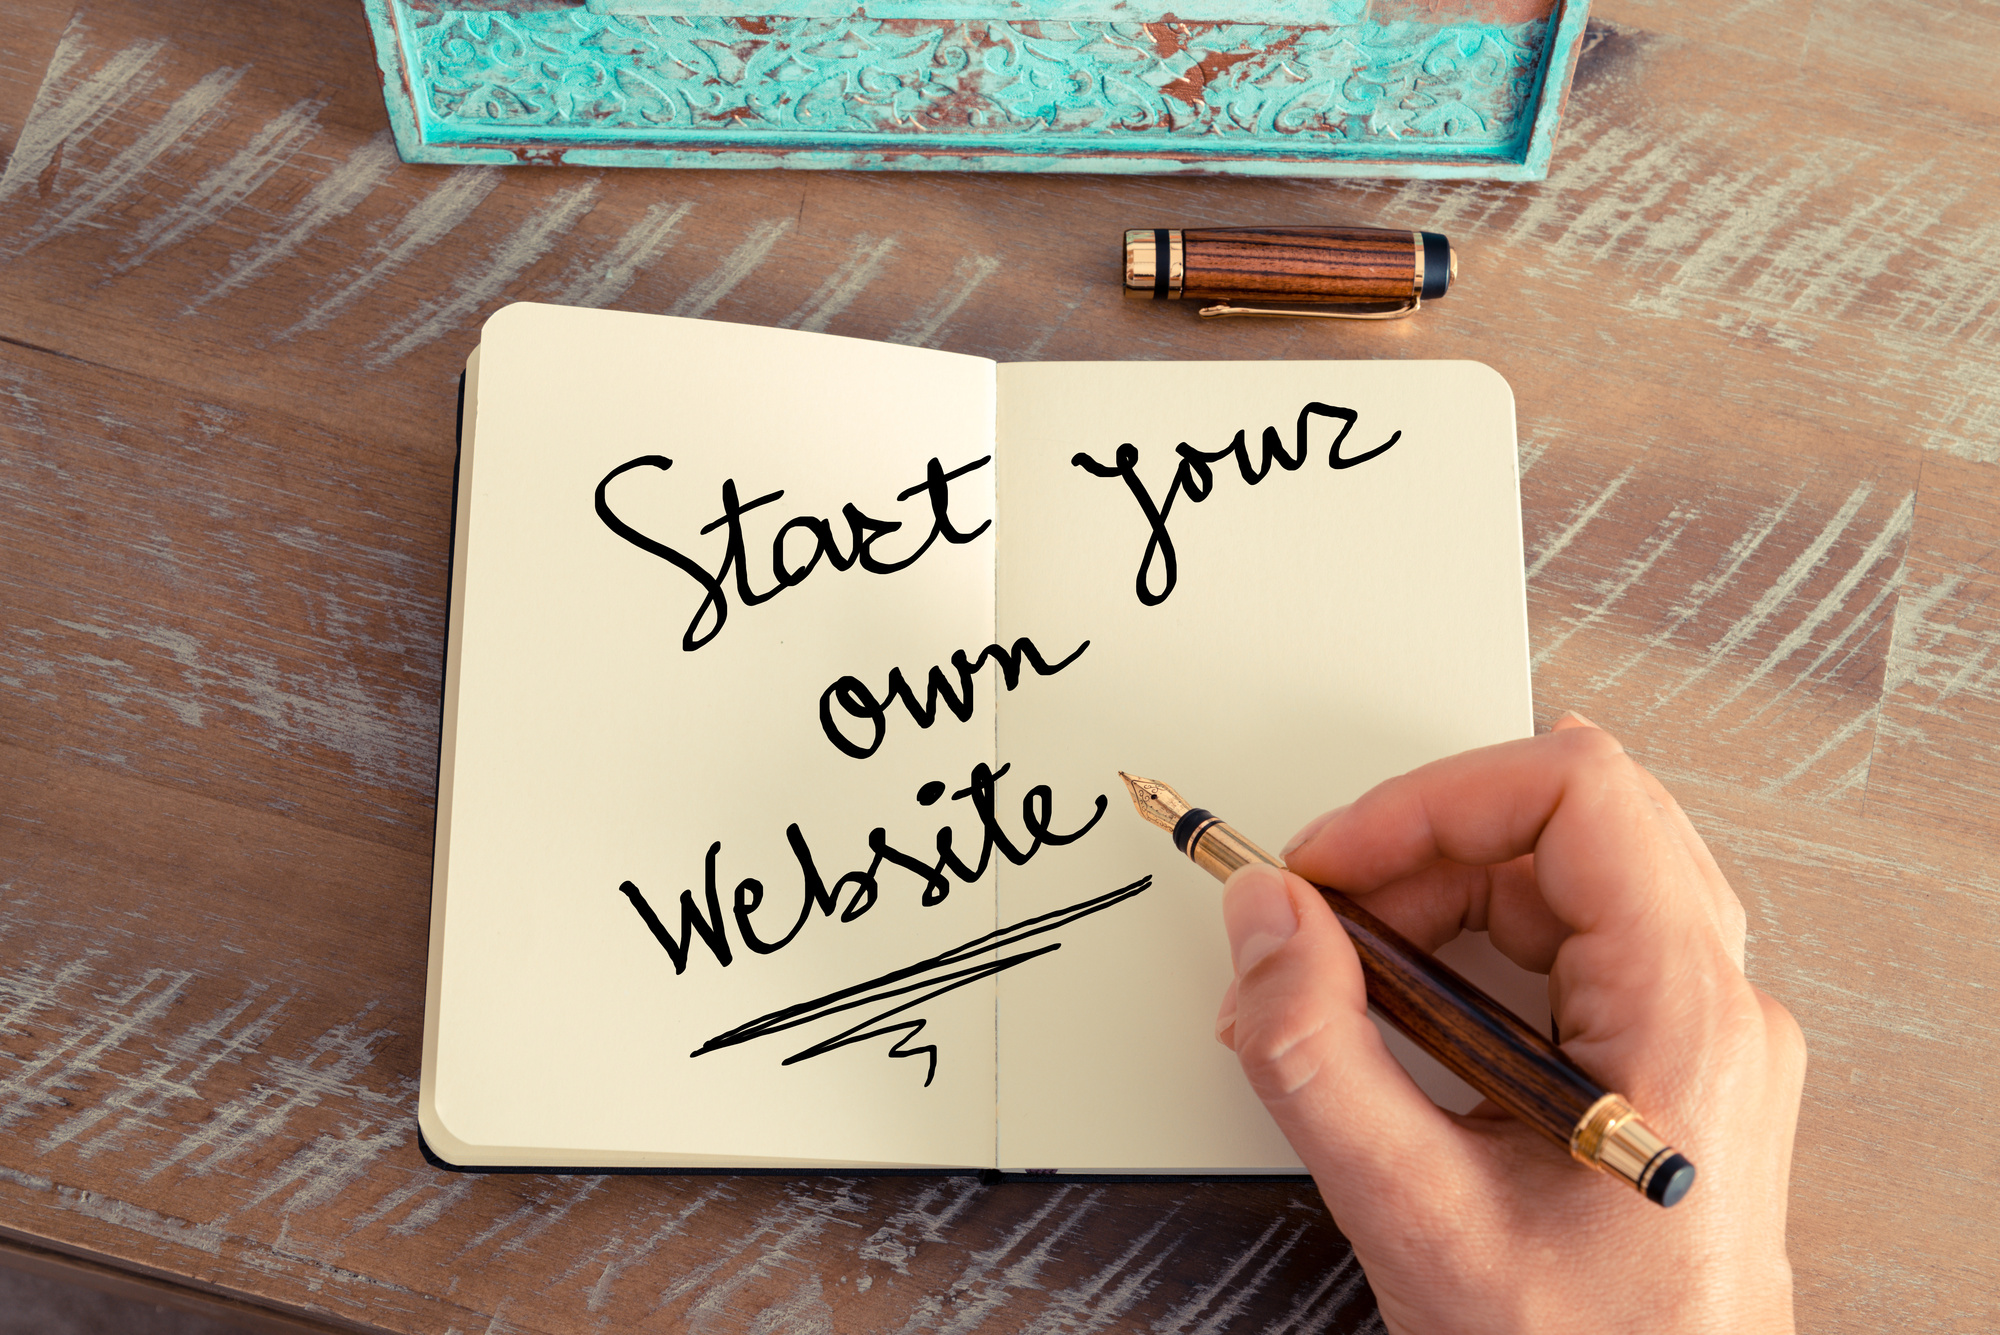 how to create a personal website